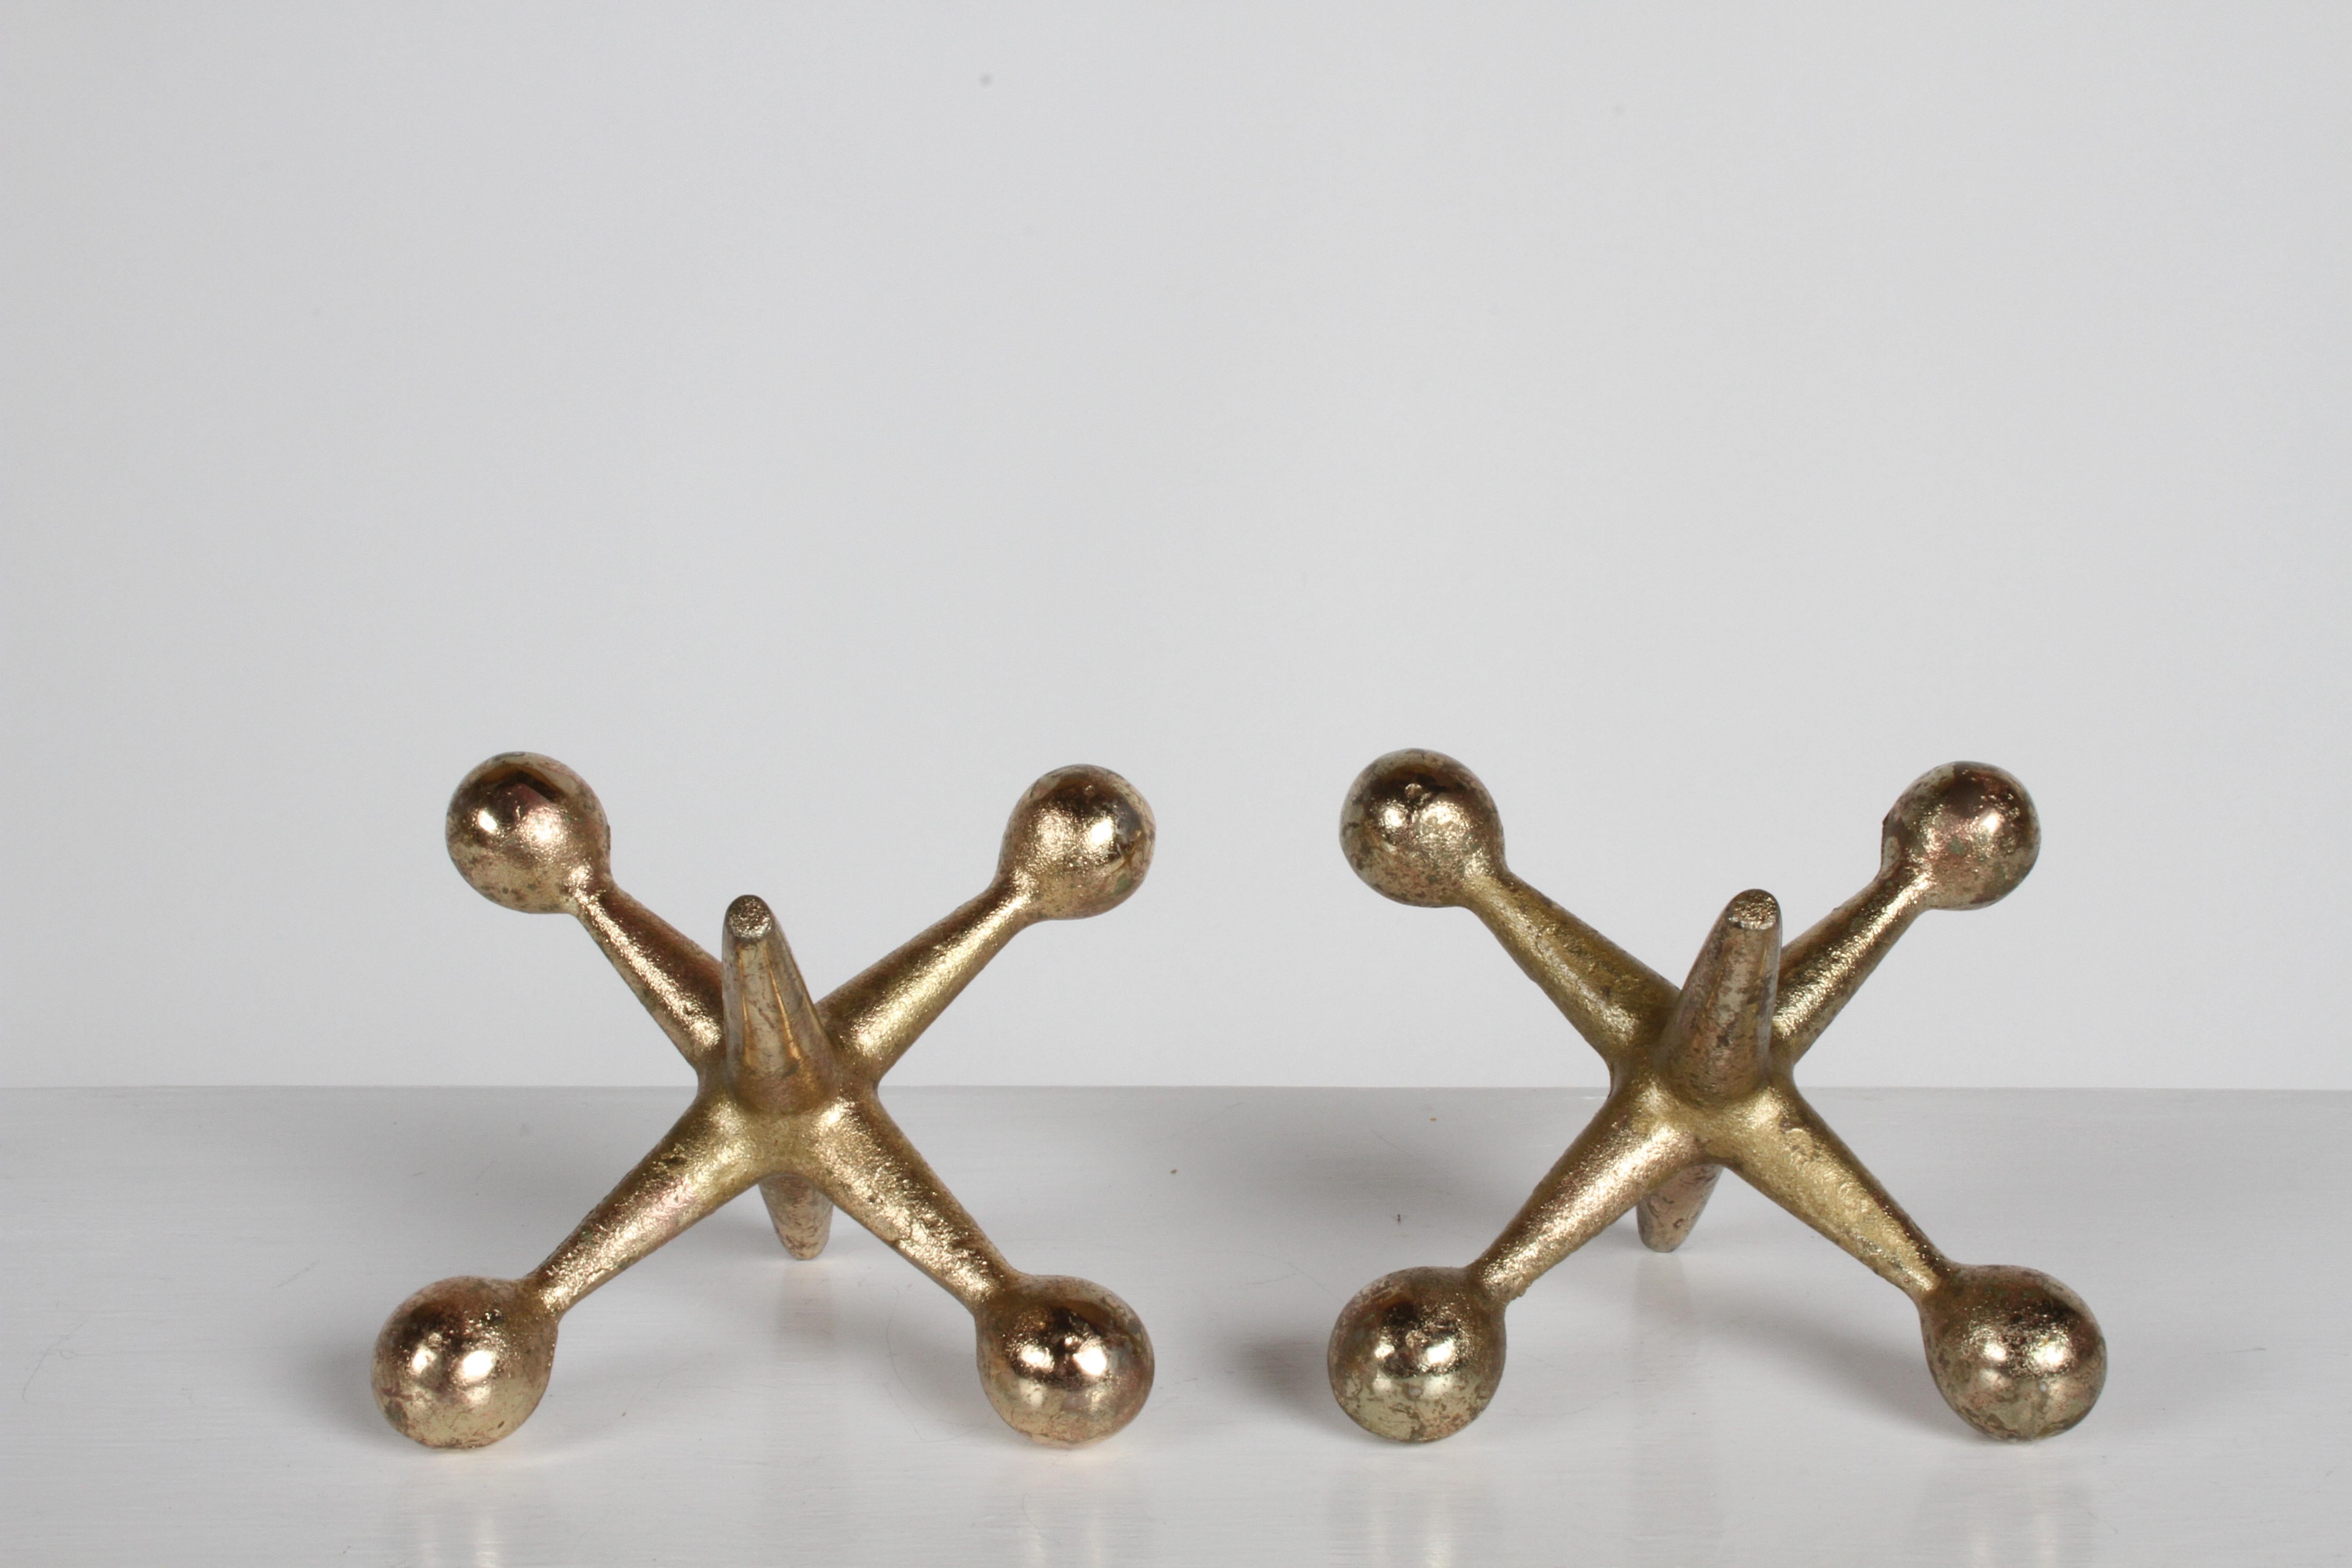 Vintage set of Bill Curry style brass plated iron jacks bookends or decorative objects. Often attributed to George Nelson, these are all original. Light wear to plating, otherwise very nice.